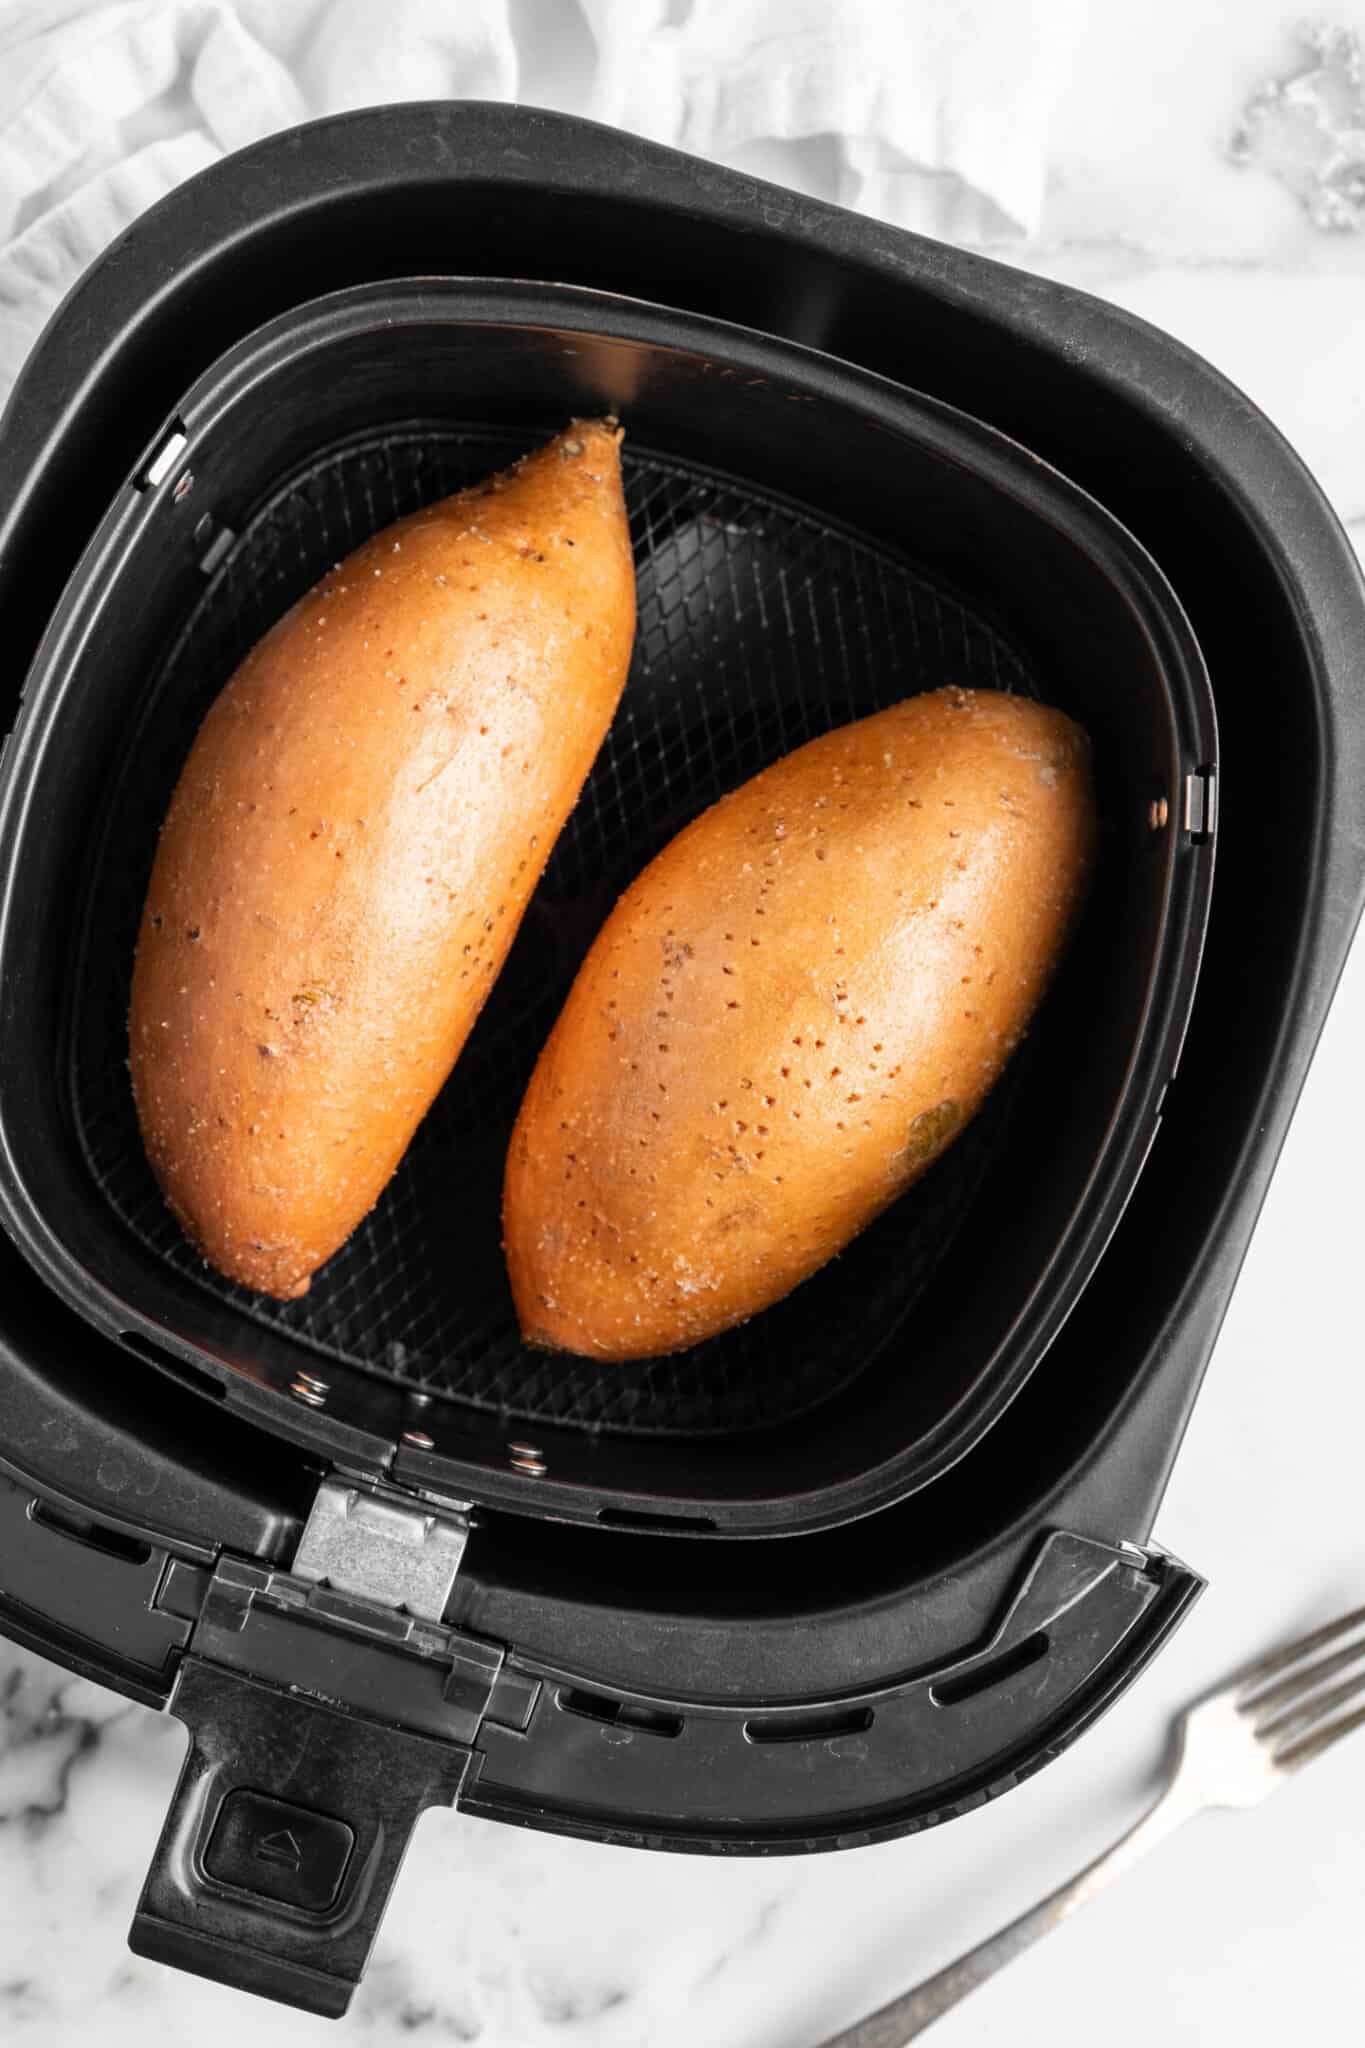 Easy Air Fryer Baked Sweet Potatoes | Jessica in the Kitchen